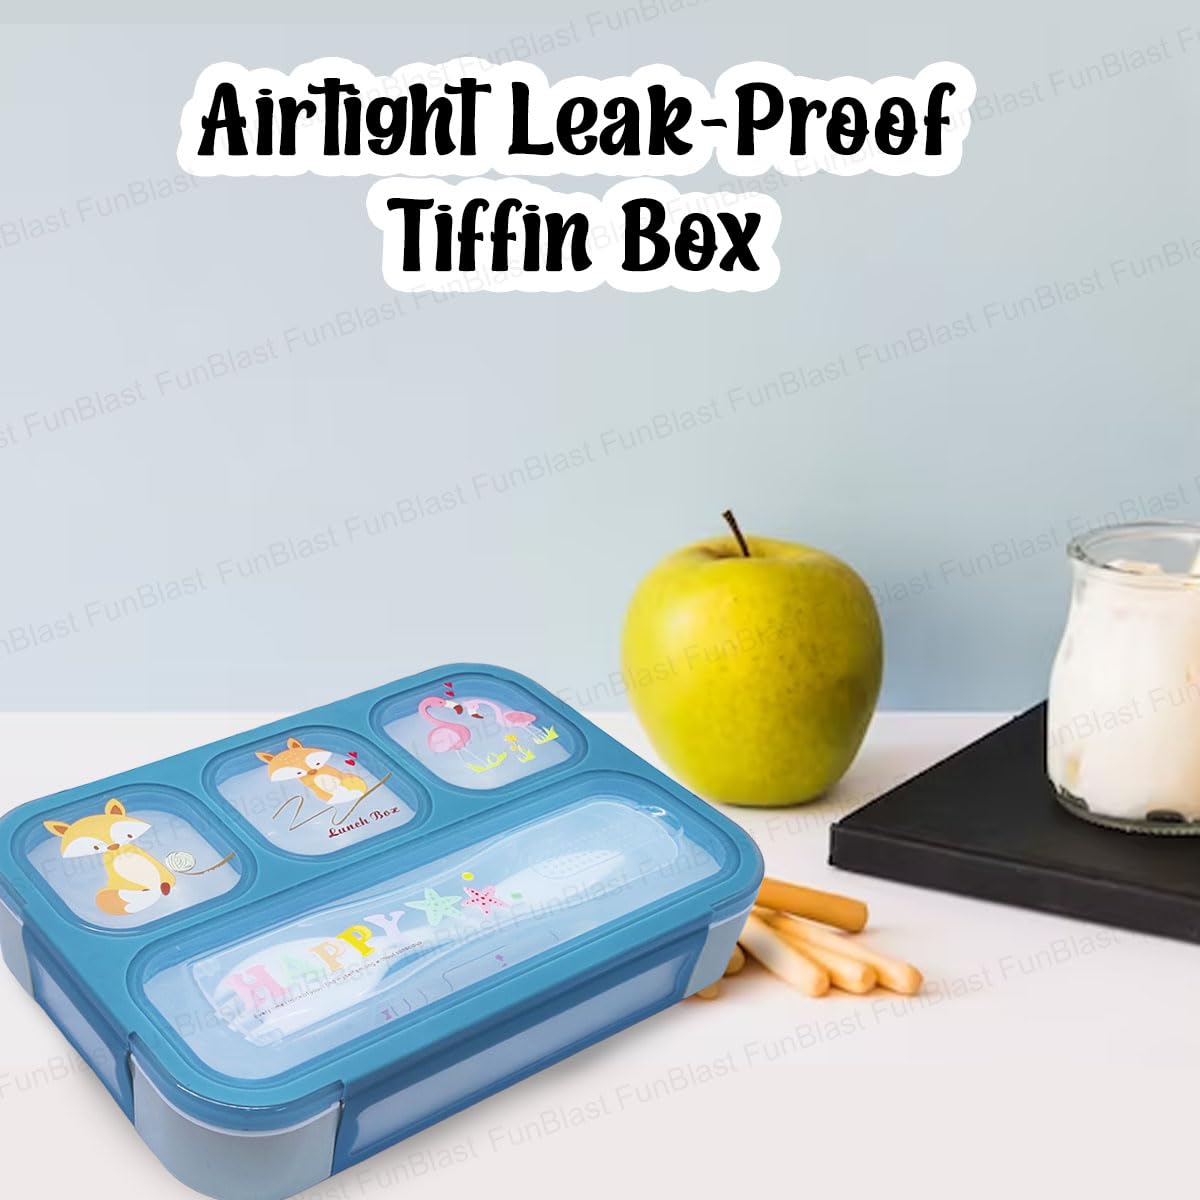 Lunch Box for Kids – Airtight Leak-Proof Tiffin Box, Lunch Box with Fork, Plastic Microwave Safe Tiffin Box with 4 Small Compartment, Bento Box (Blue)